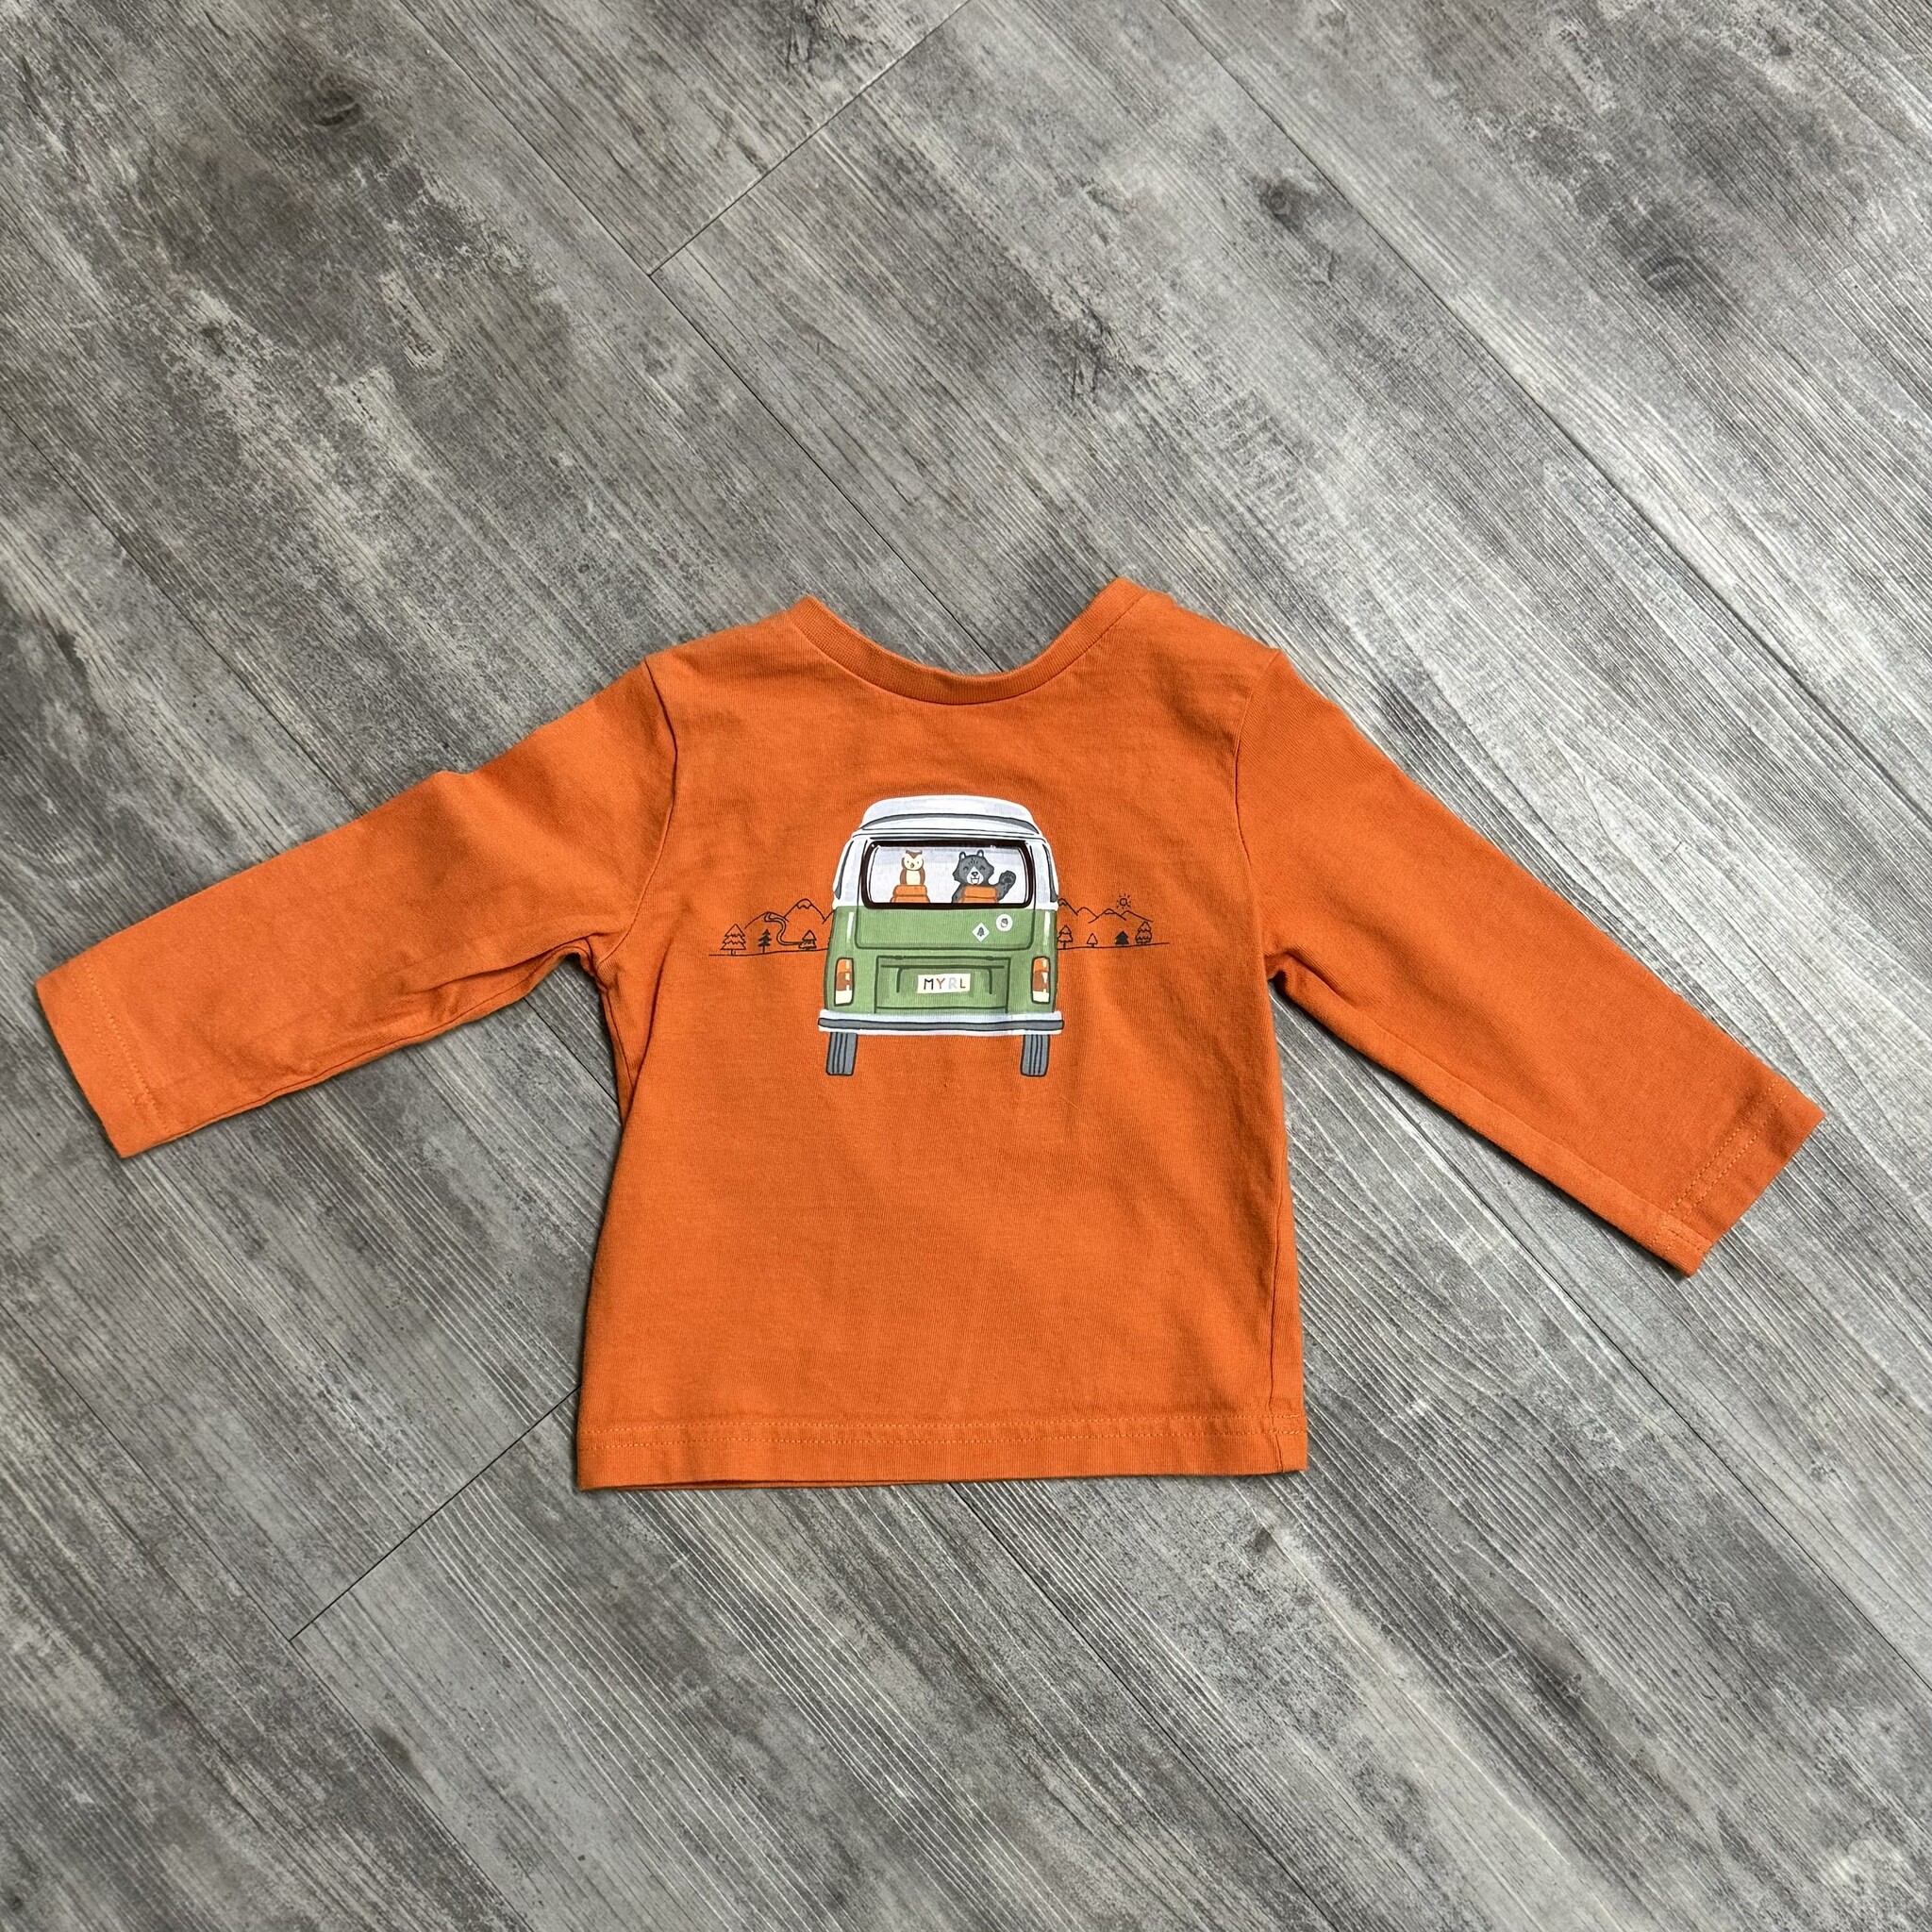 Gone Camping Shirt - Size 9M